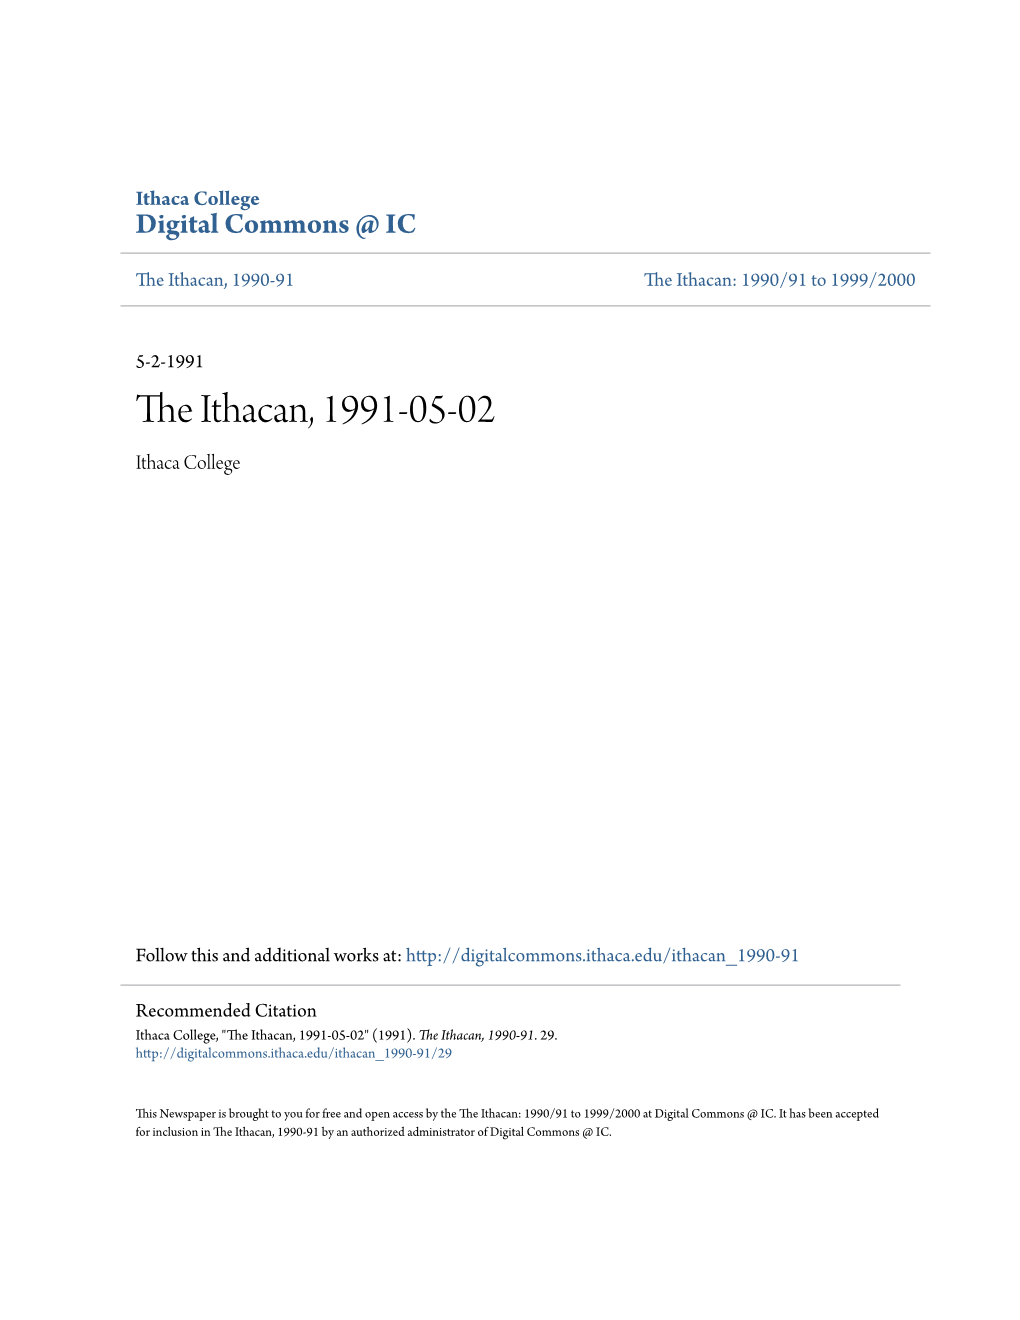 The Ithacan, 1991-05-02